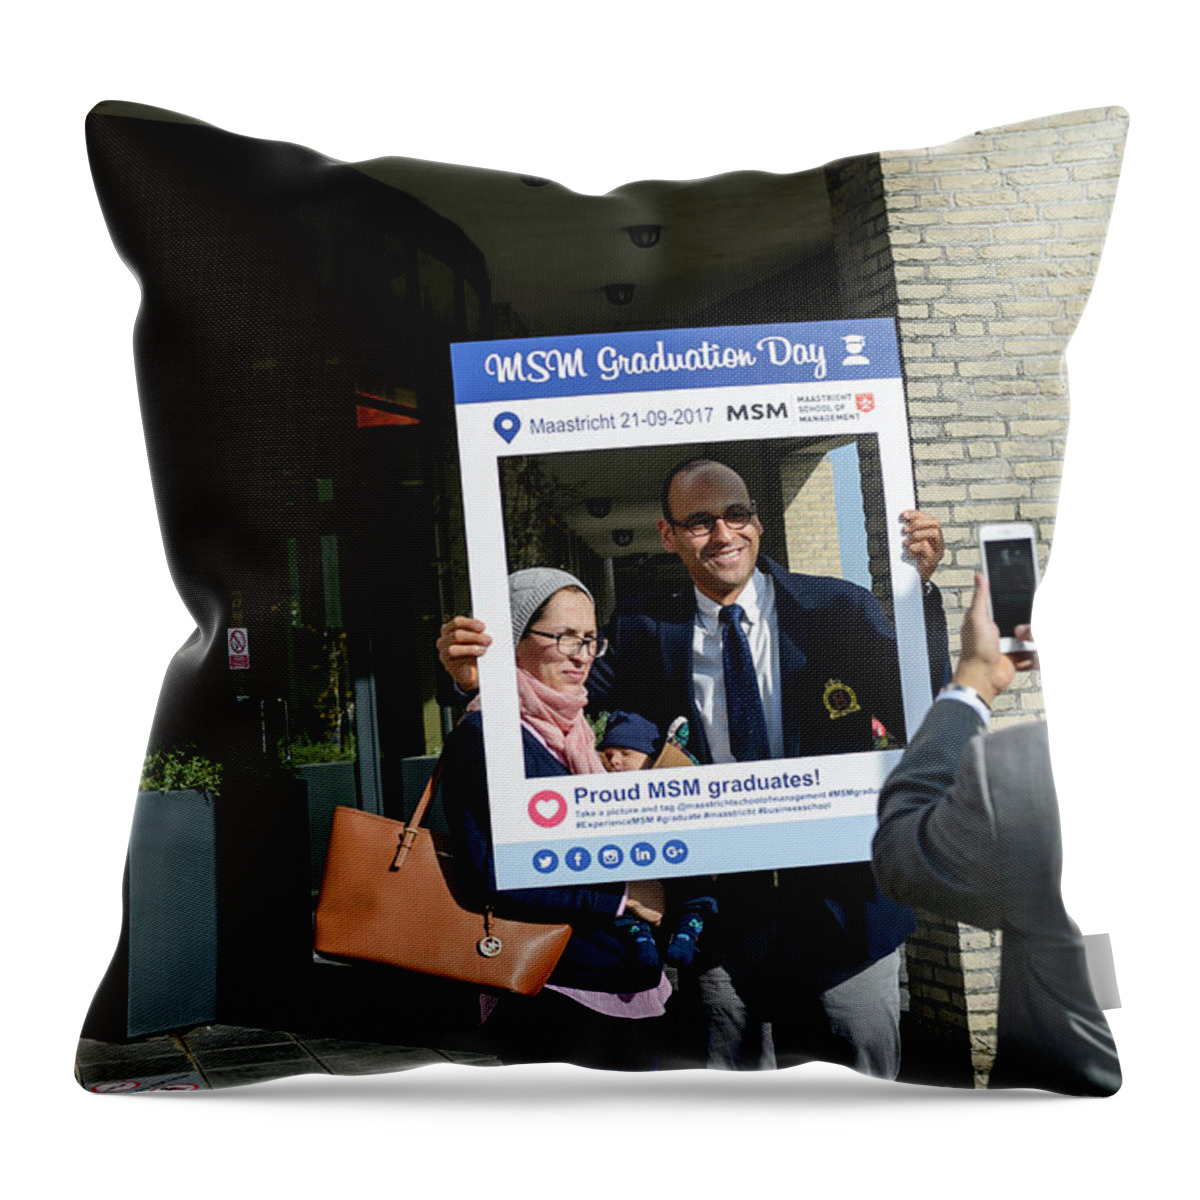  Throw Pillow featuring the photograph MSM Graduation Ceremony 2017 #6 by Maastricht School Of Management